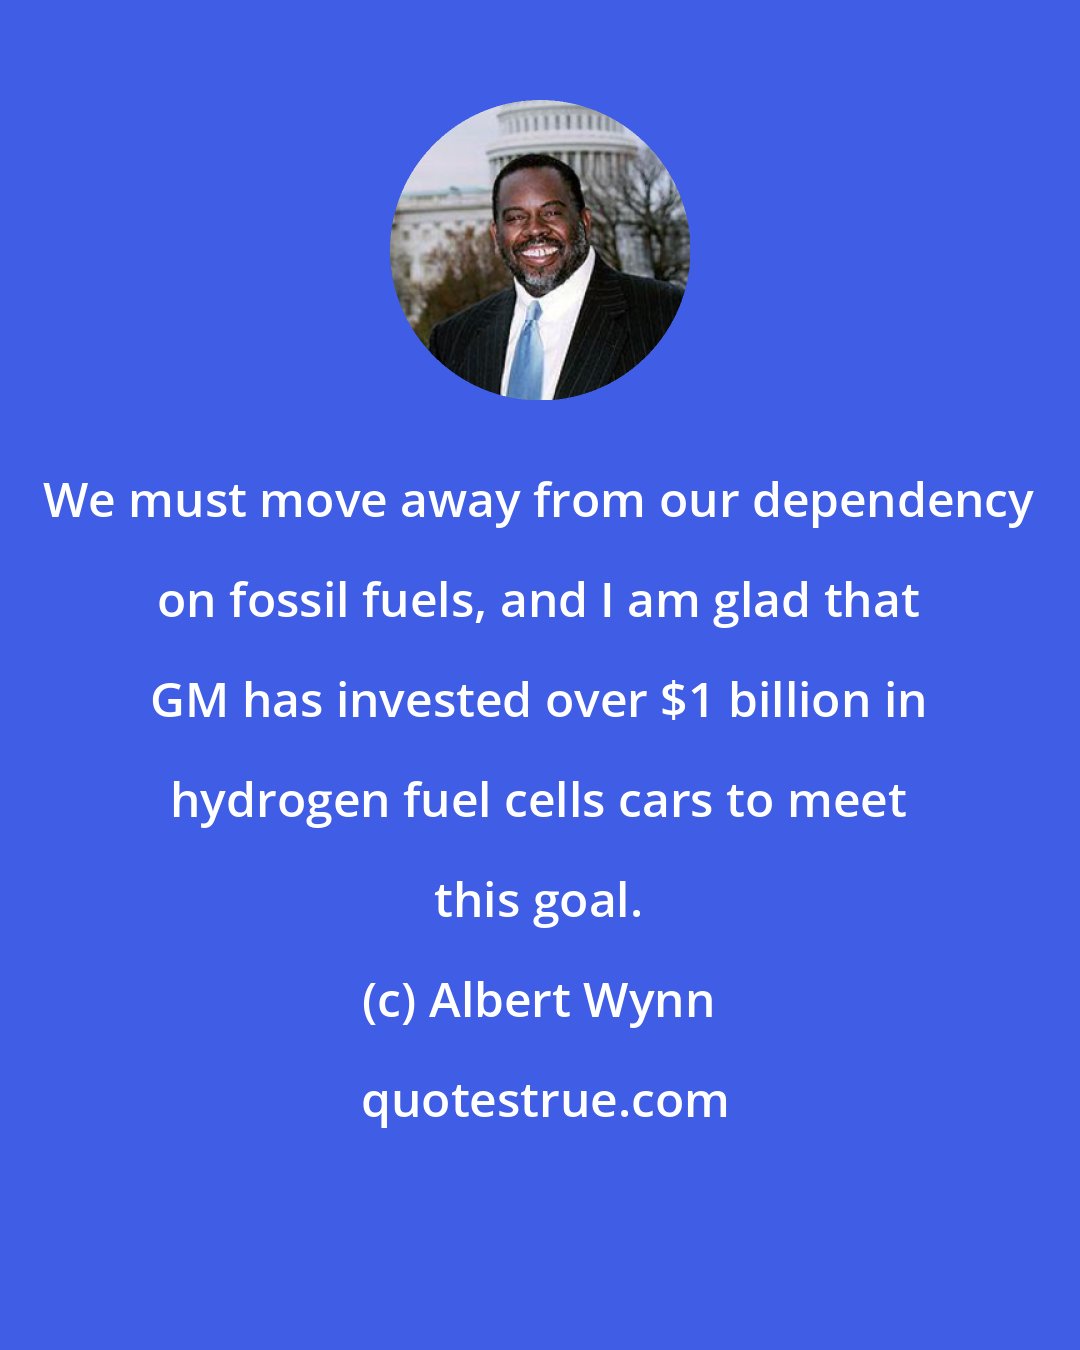 Albert Wynn: We must move away from our dependency on fossil fuels, and I am glad that GM has invested over $1 billion in hydrogen fuel cells cars to meet this goal.